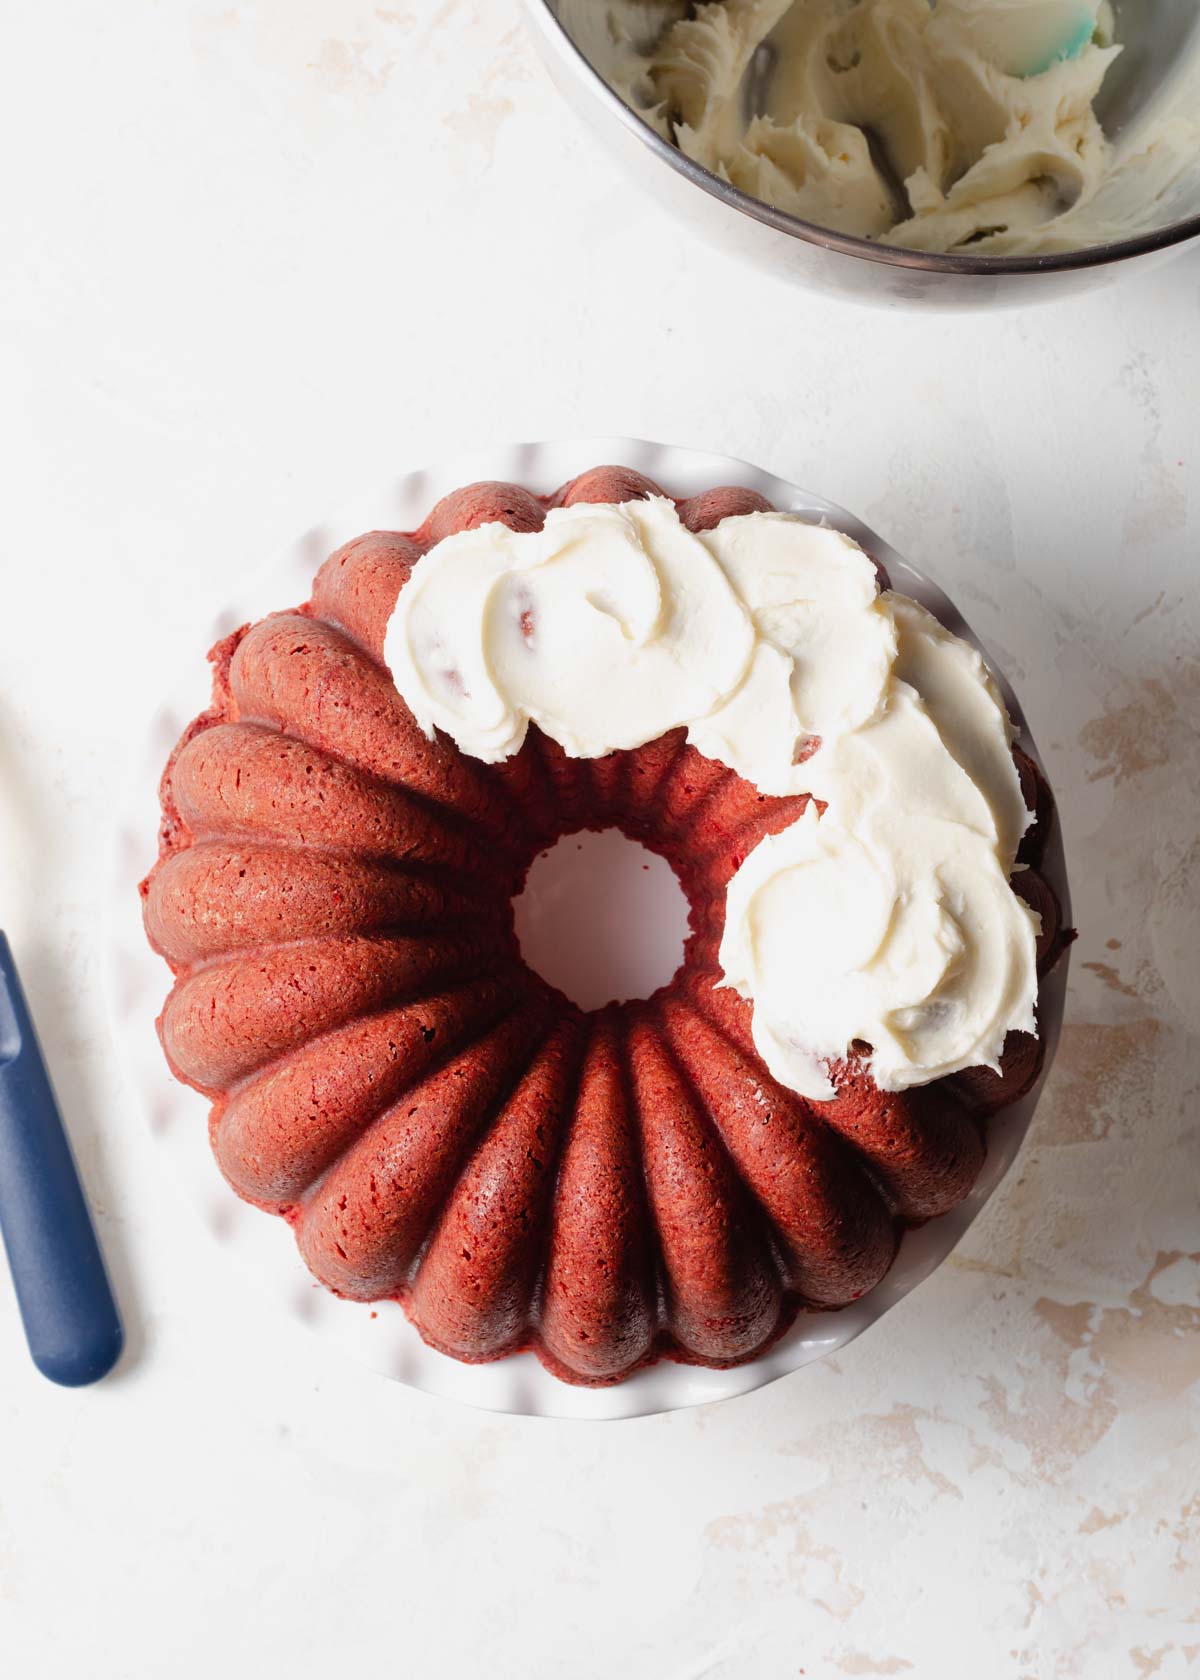 A red velvet Bundt Cake on a white cake stand with fluffy cream cheese frosting